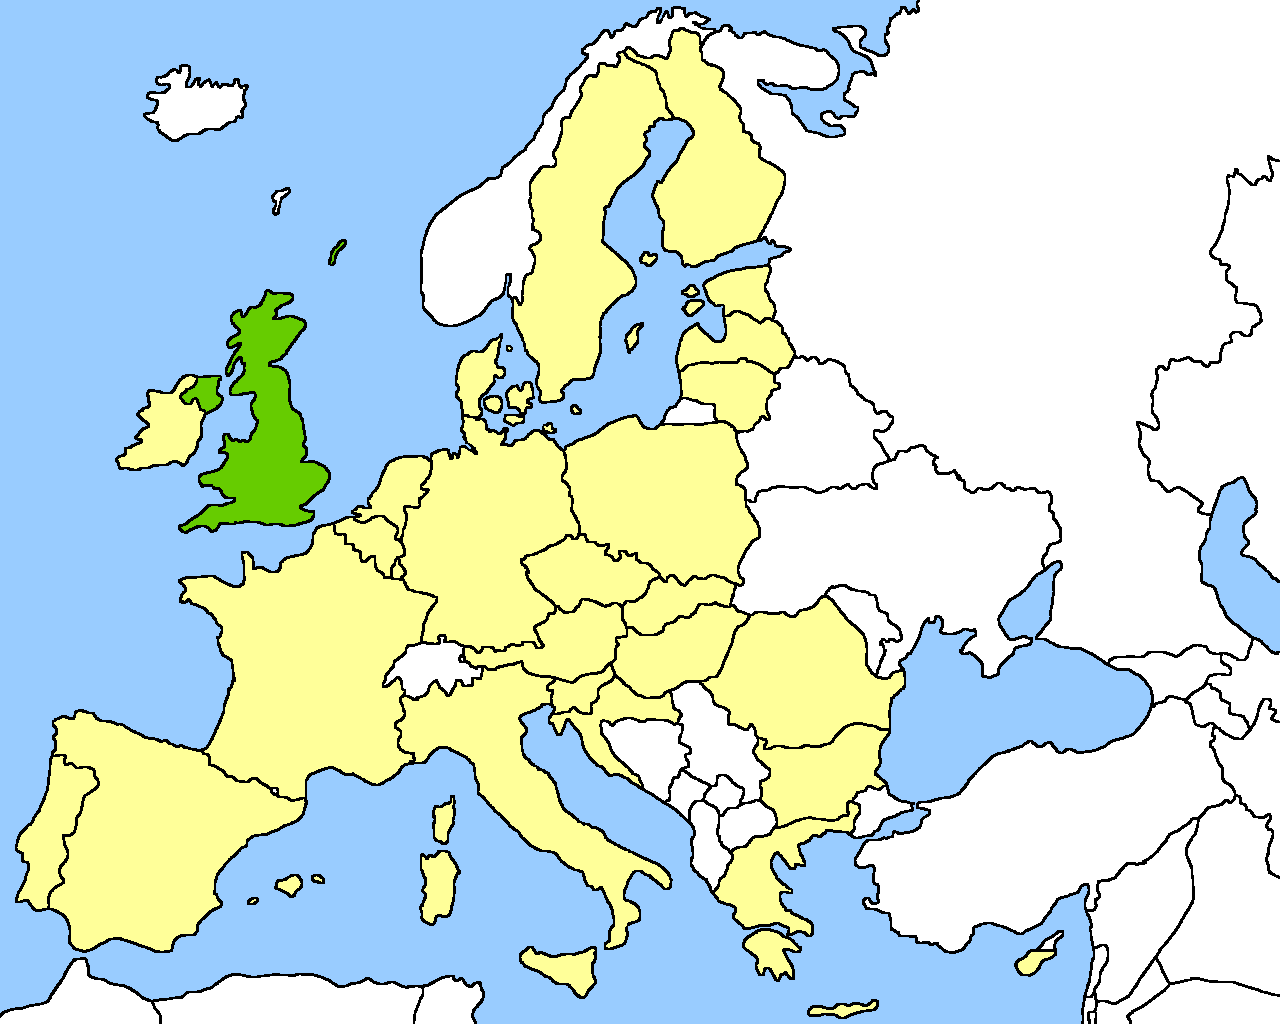 Location of the UK